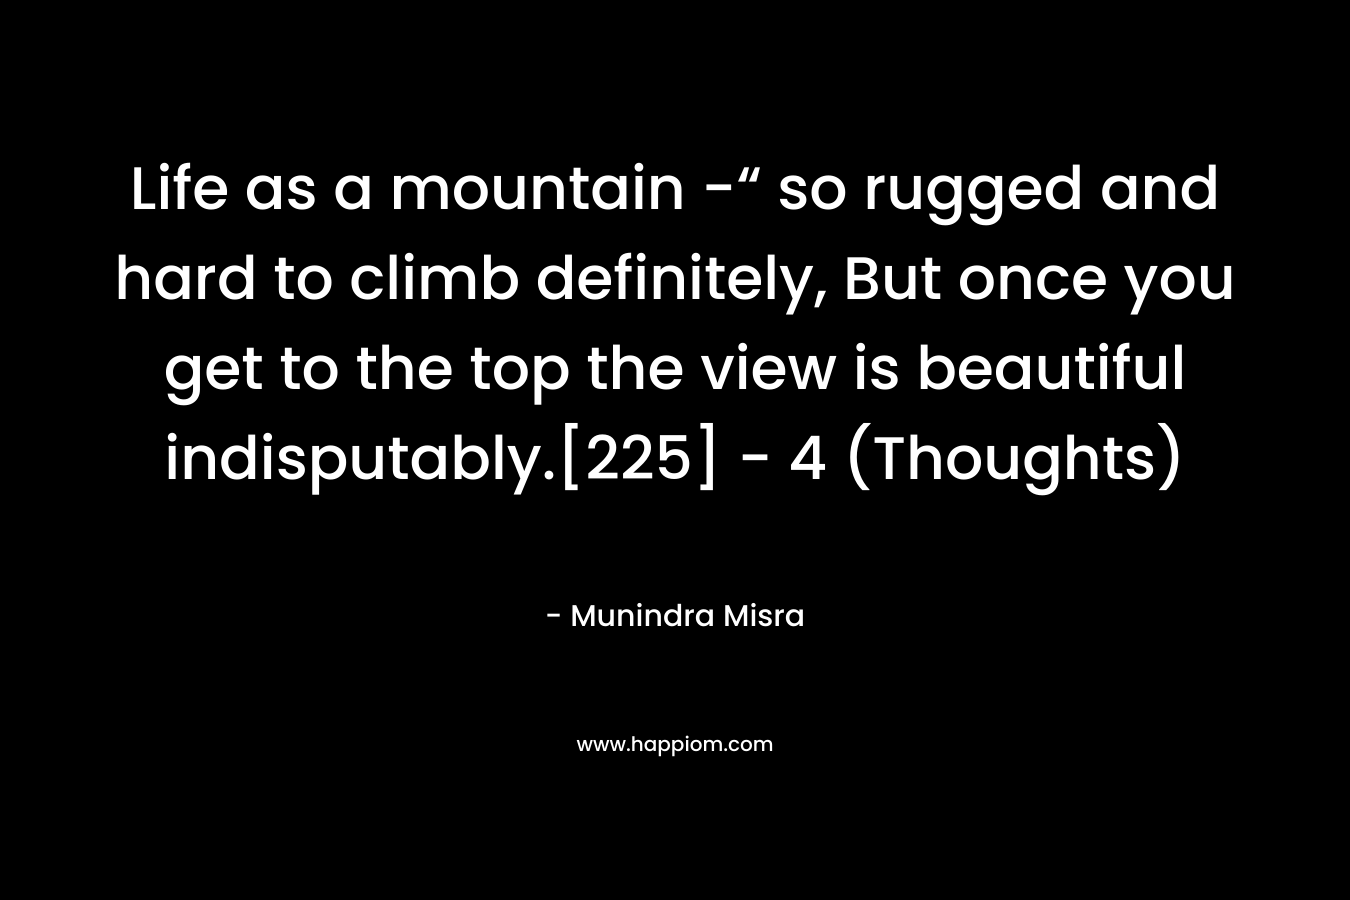 Life as a mountain -“ so rugged and hard to climb definitely, But once you get to the top the view is beautiful indisputably.[225]	- 4 (Thoughts)